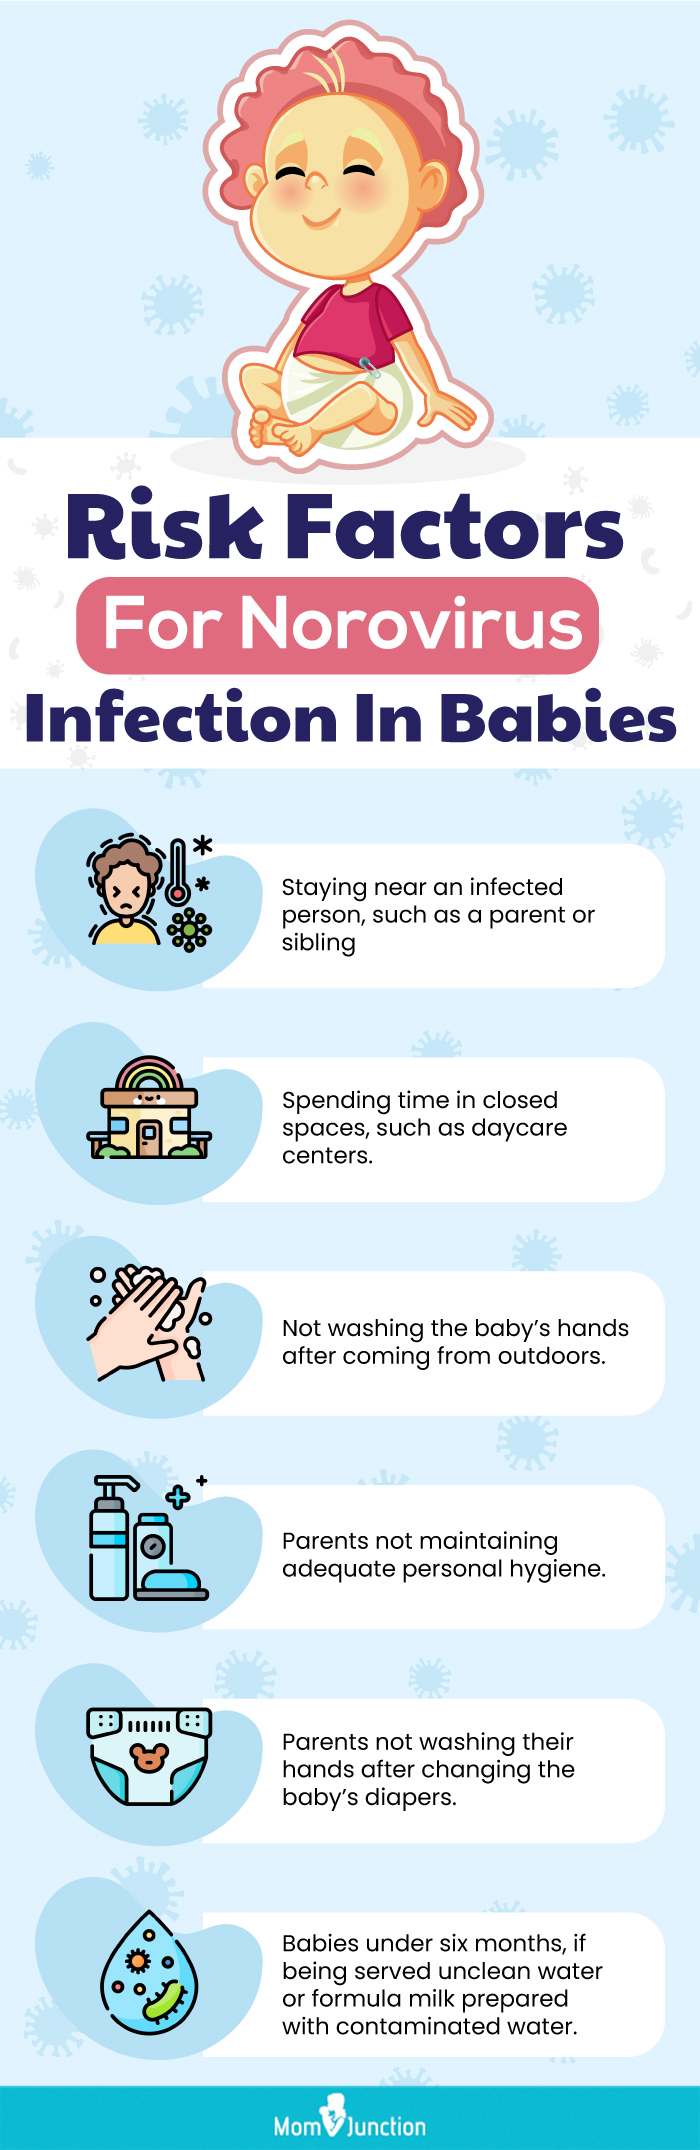 risk factors for norovirus infection in babies (infographic)